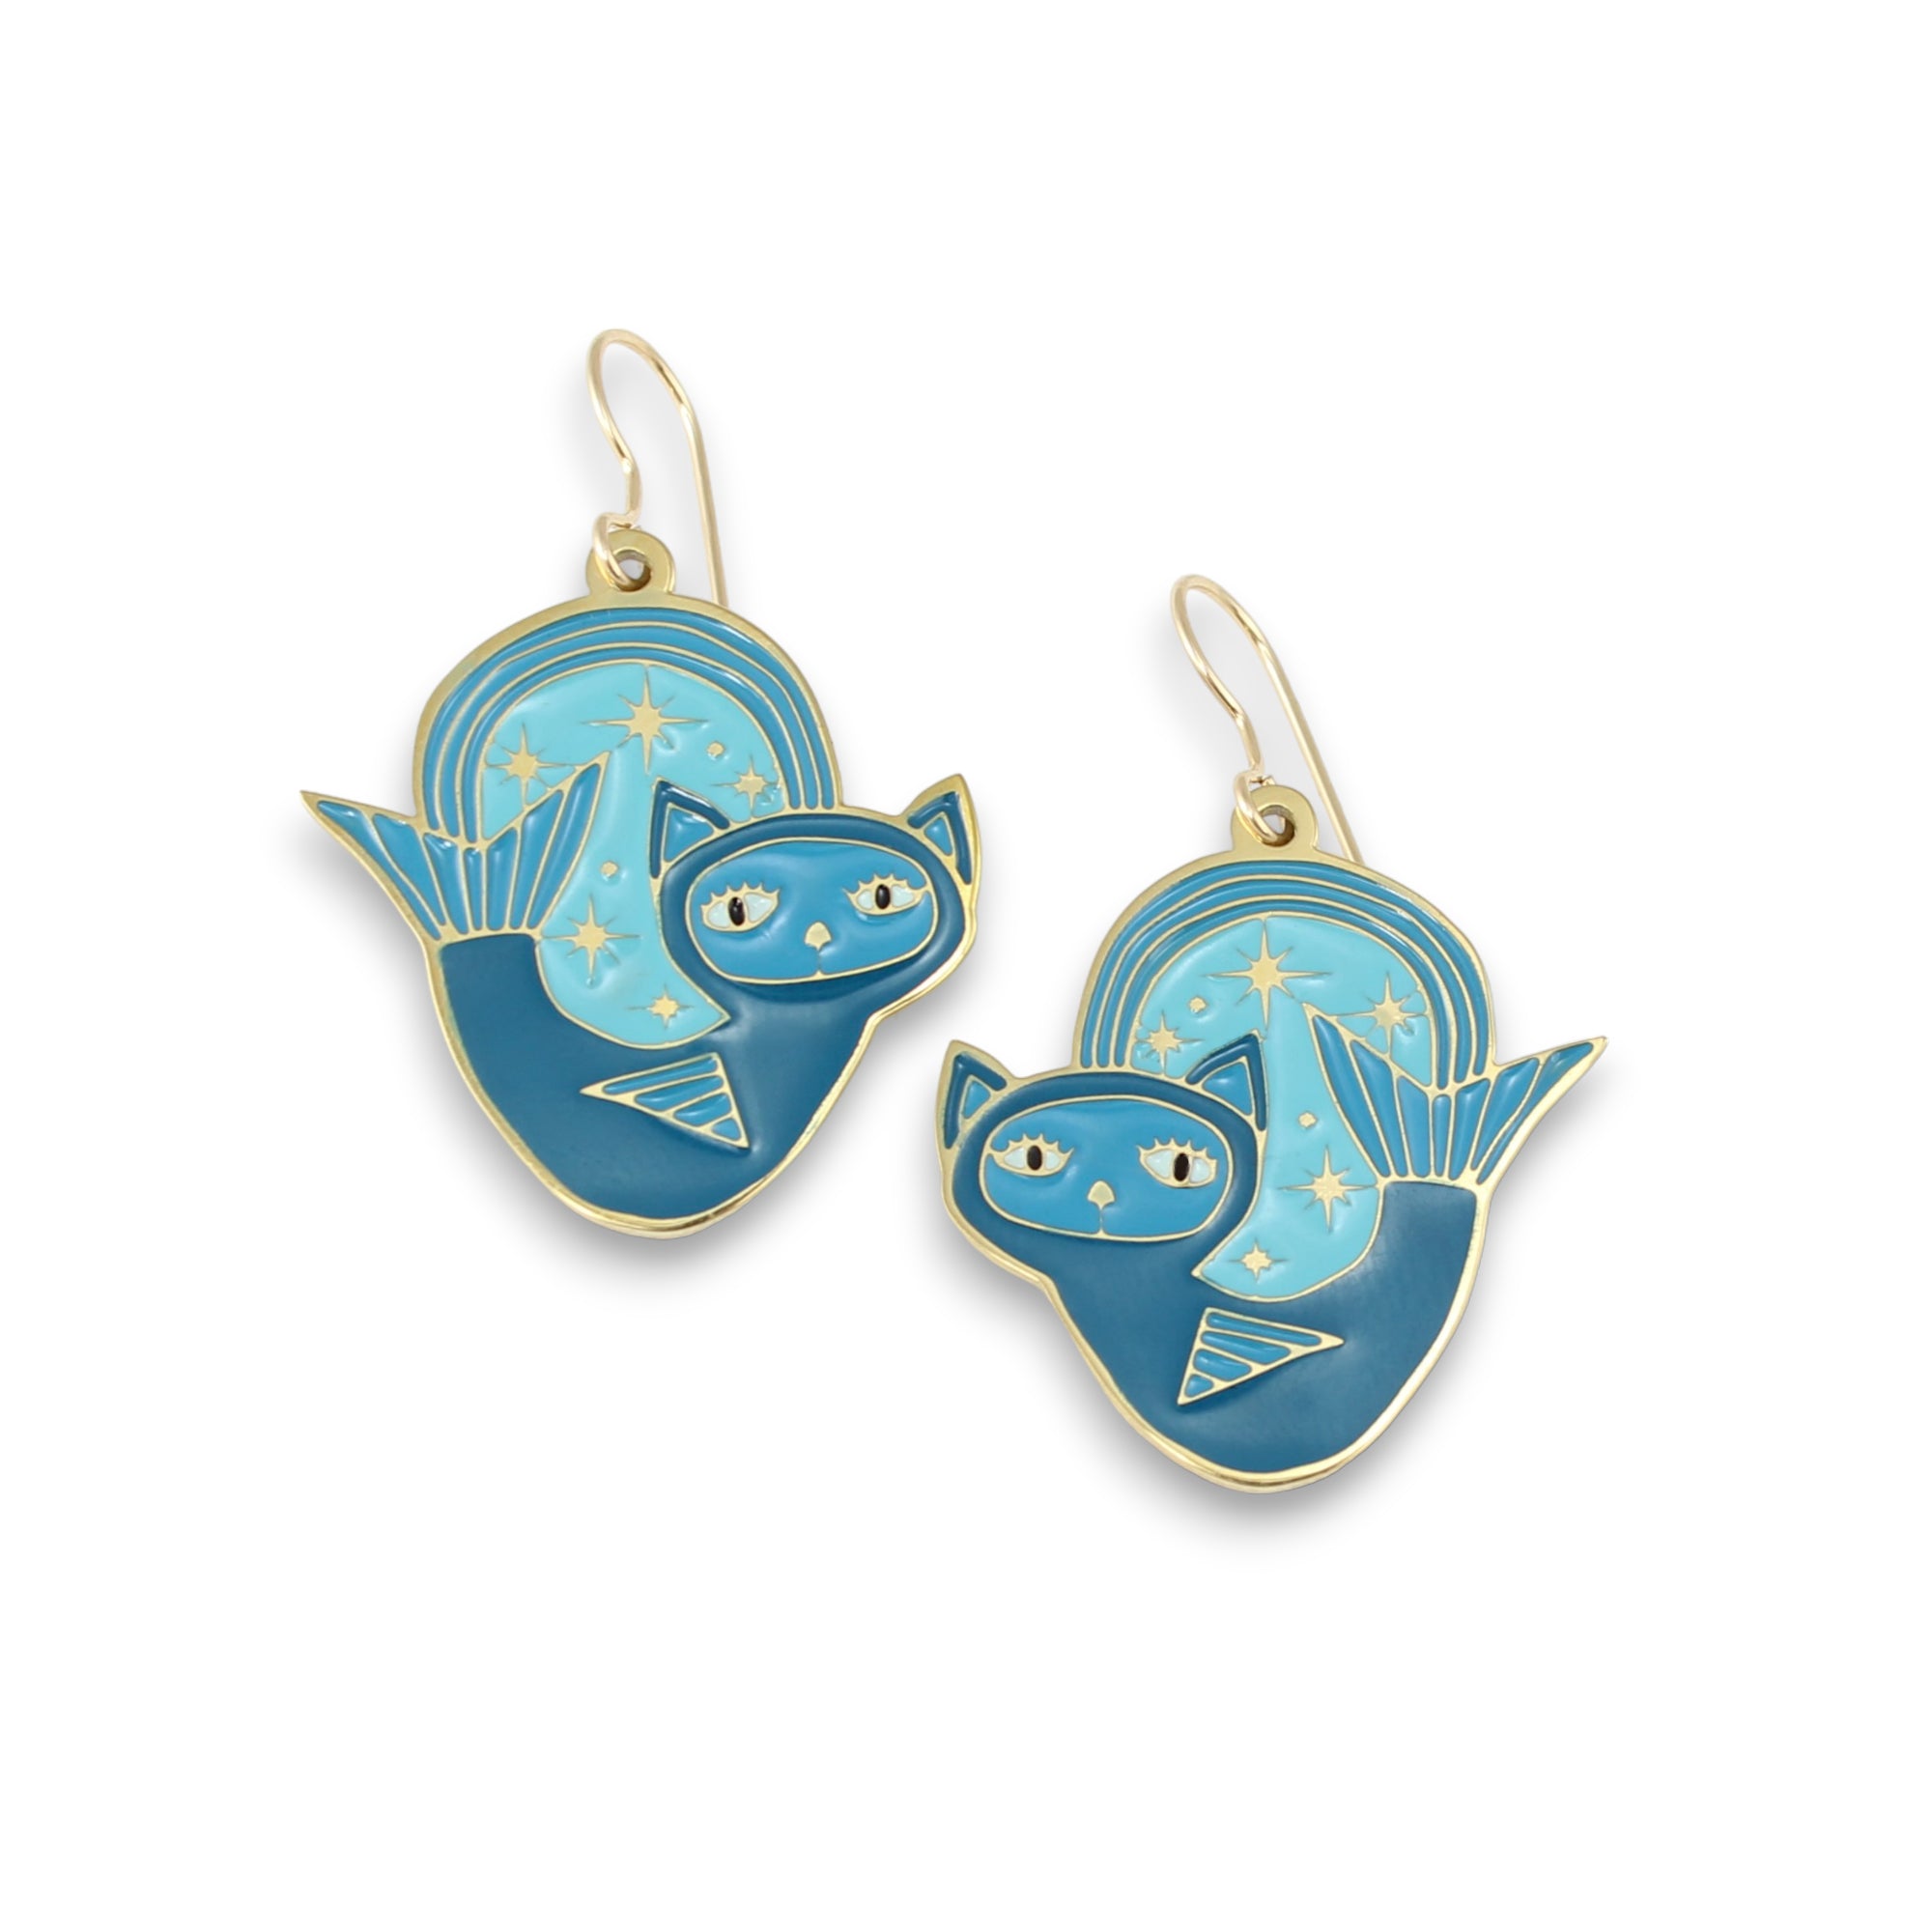 Gold Cat Dangle Earrings - Night Swimming Purrmaid - Adorable Cat Char –  Mark Poulin Jewelry